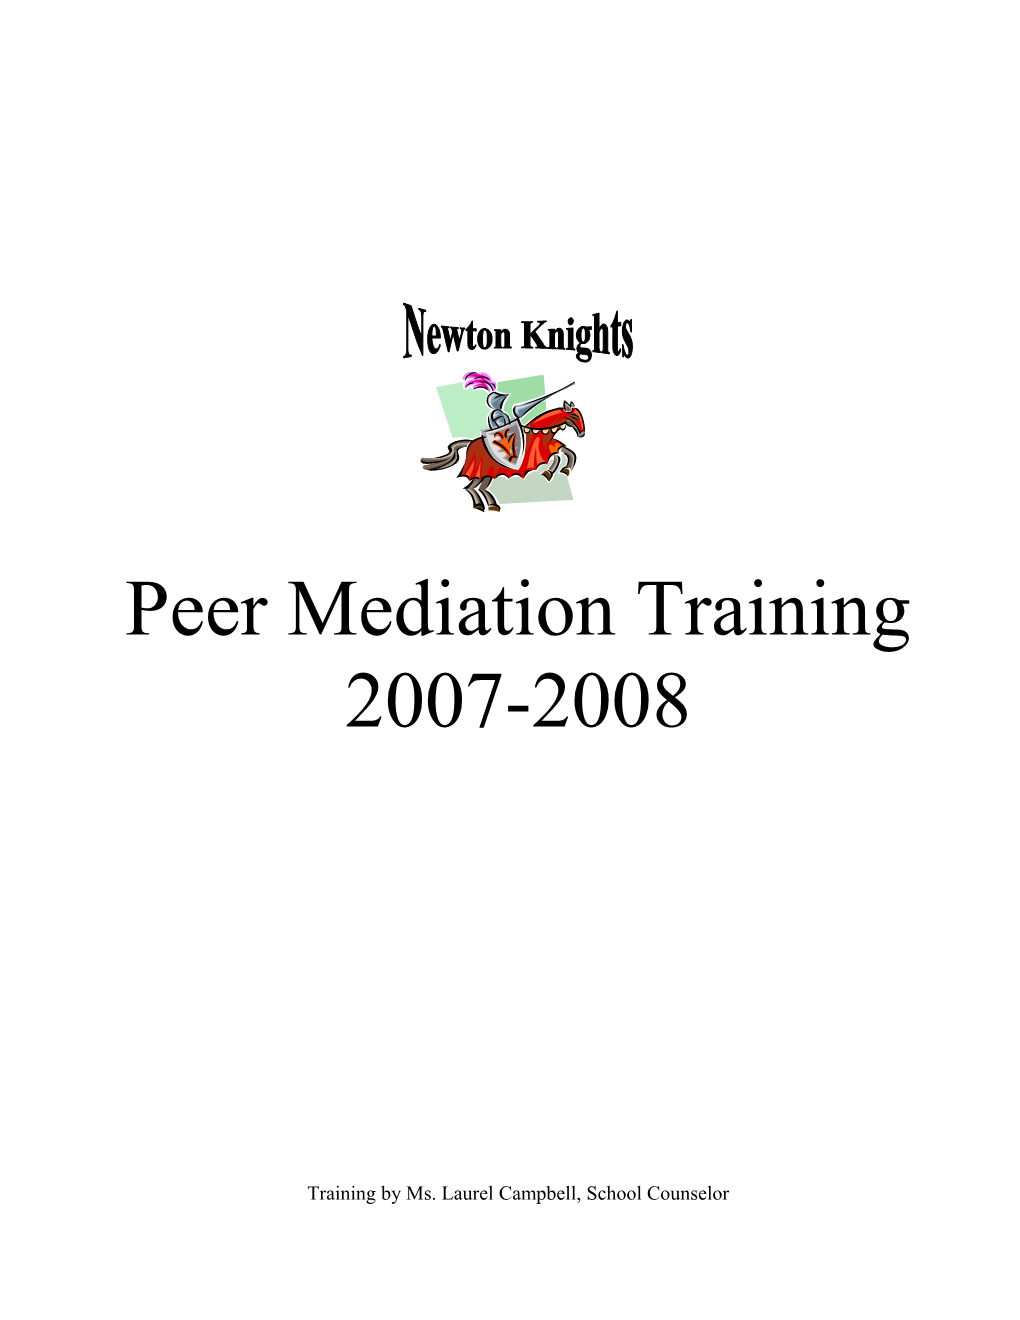 Introduction to Peer Mediation